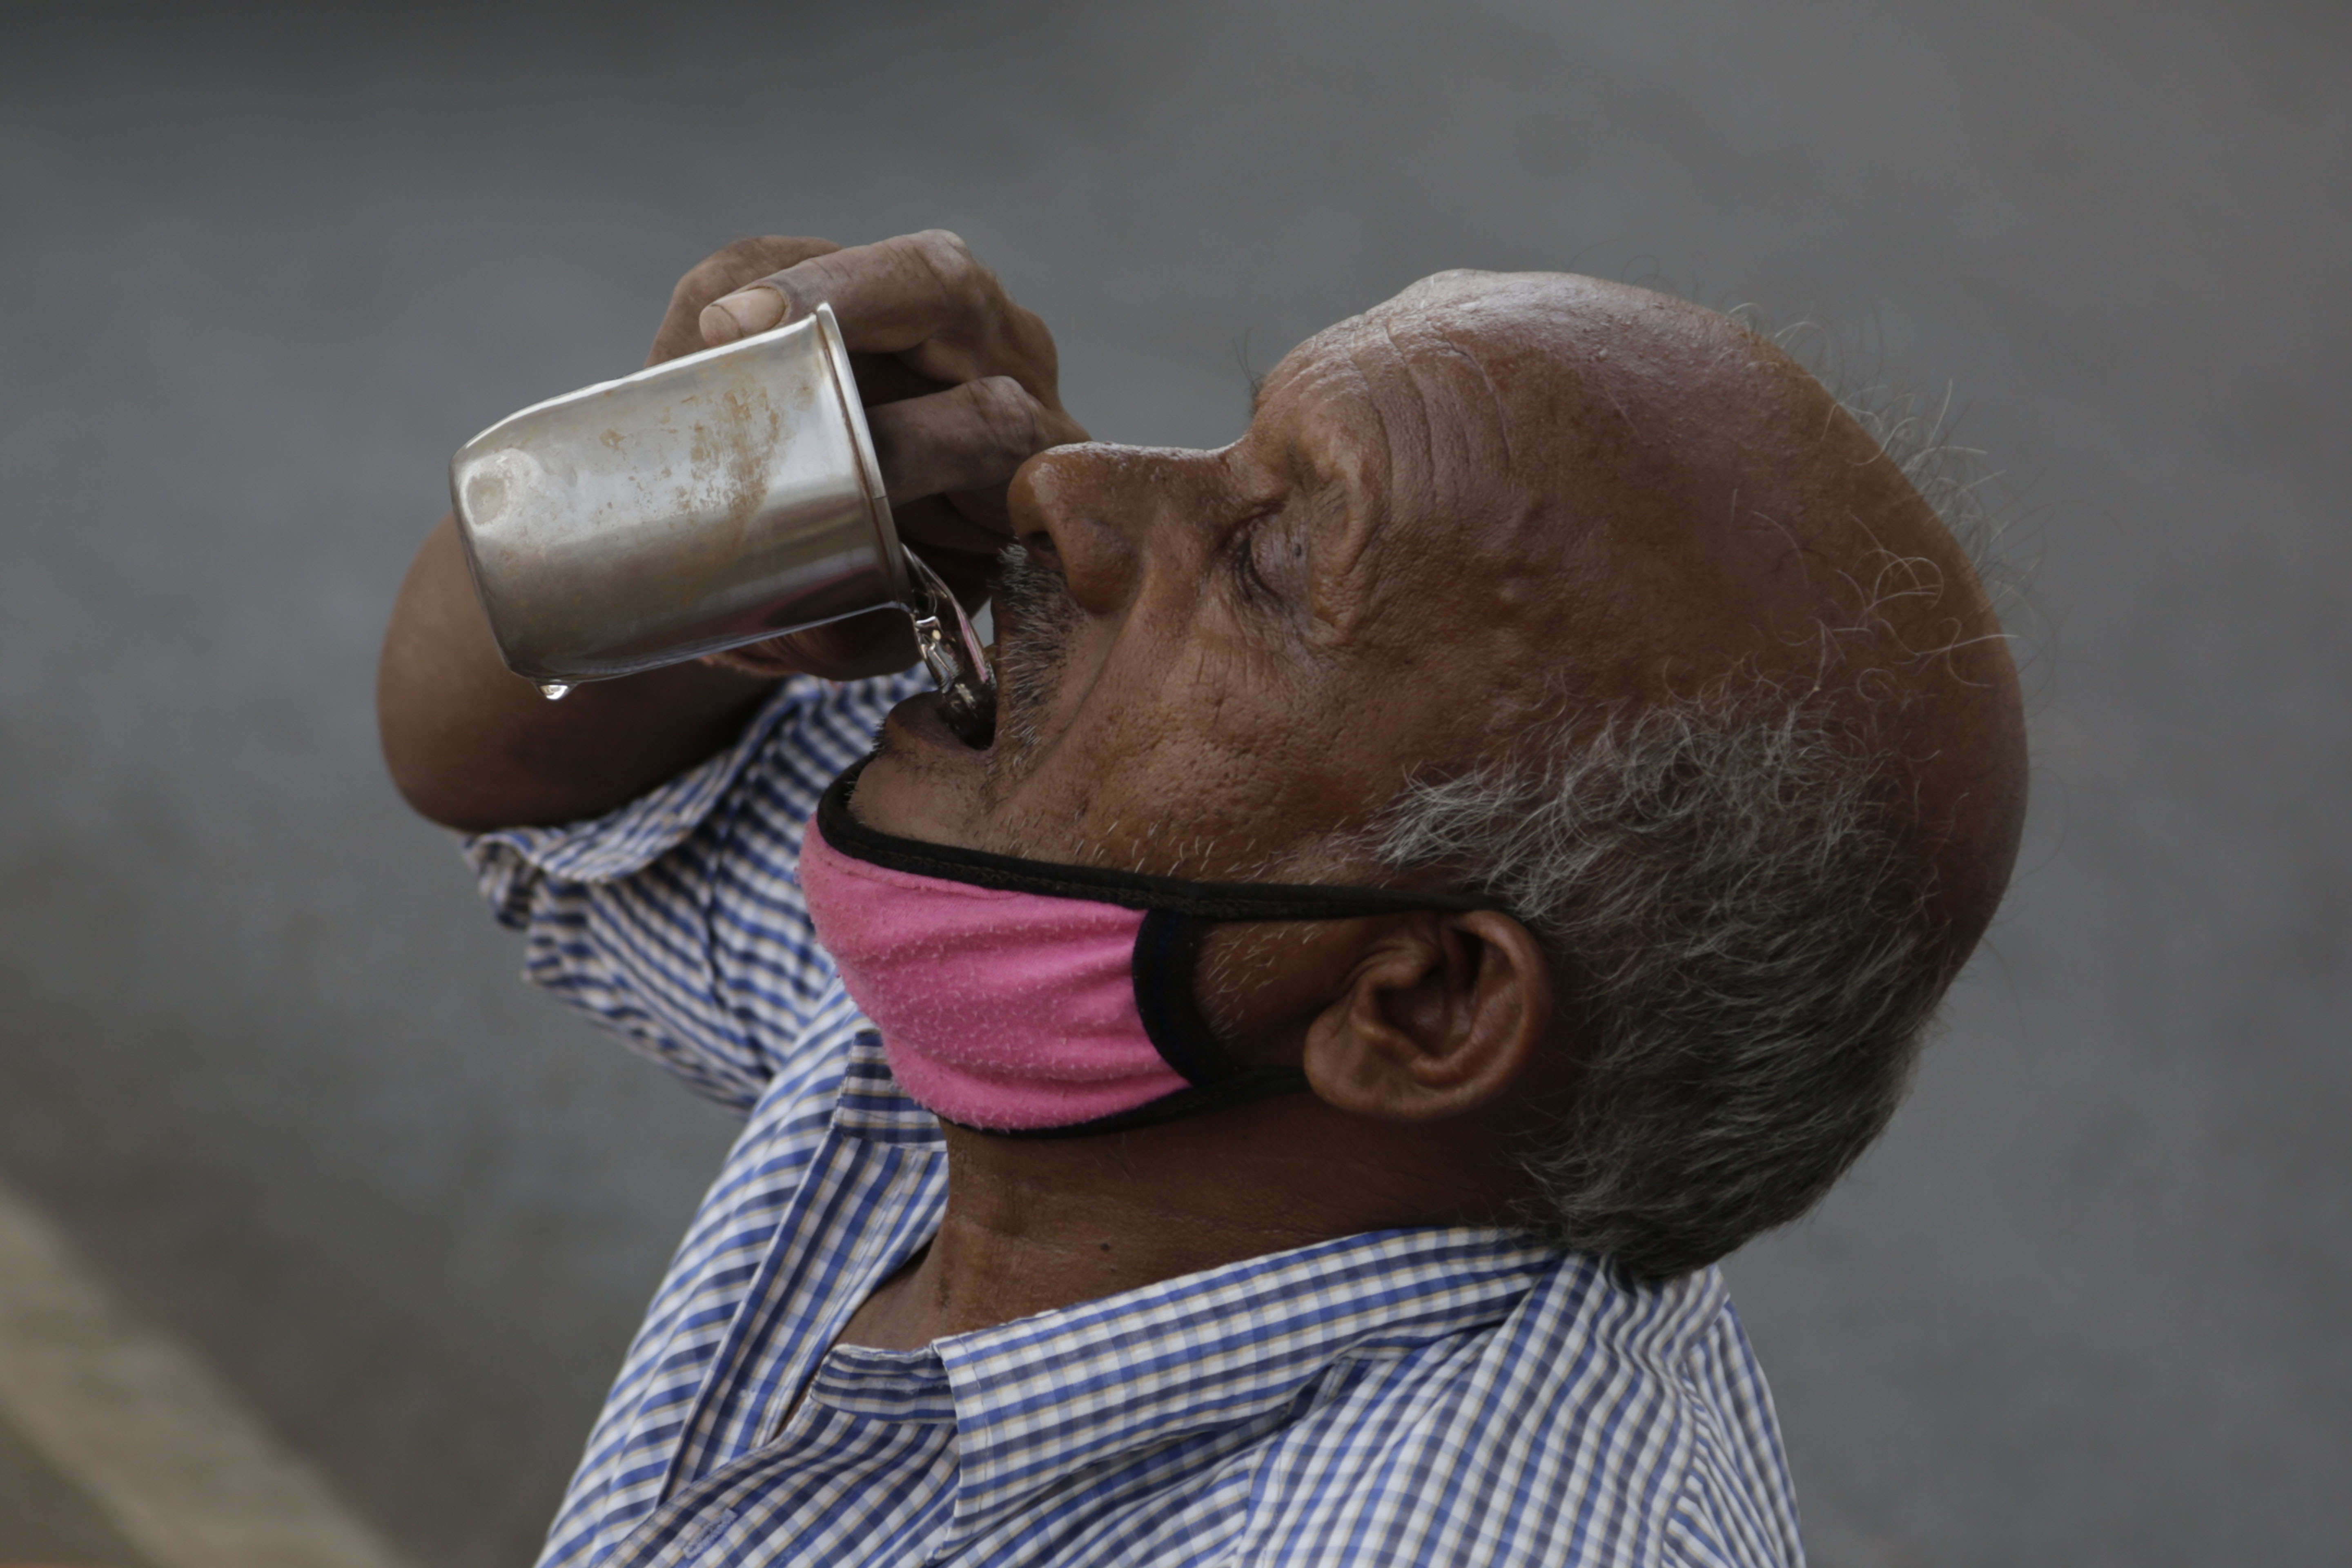 An Indian man selling earthen pots beneath a bridge drinks water in Ahmedabad, India, Thursday, May 28, 2020. India faced scorching temperatures and the worst locust invasion in decades on Thursday as authorities prepared for the end of a months-long coronavirus lockdown despite recording thousands of new infections every day. (AP Photo/Ajit Solanki)